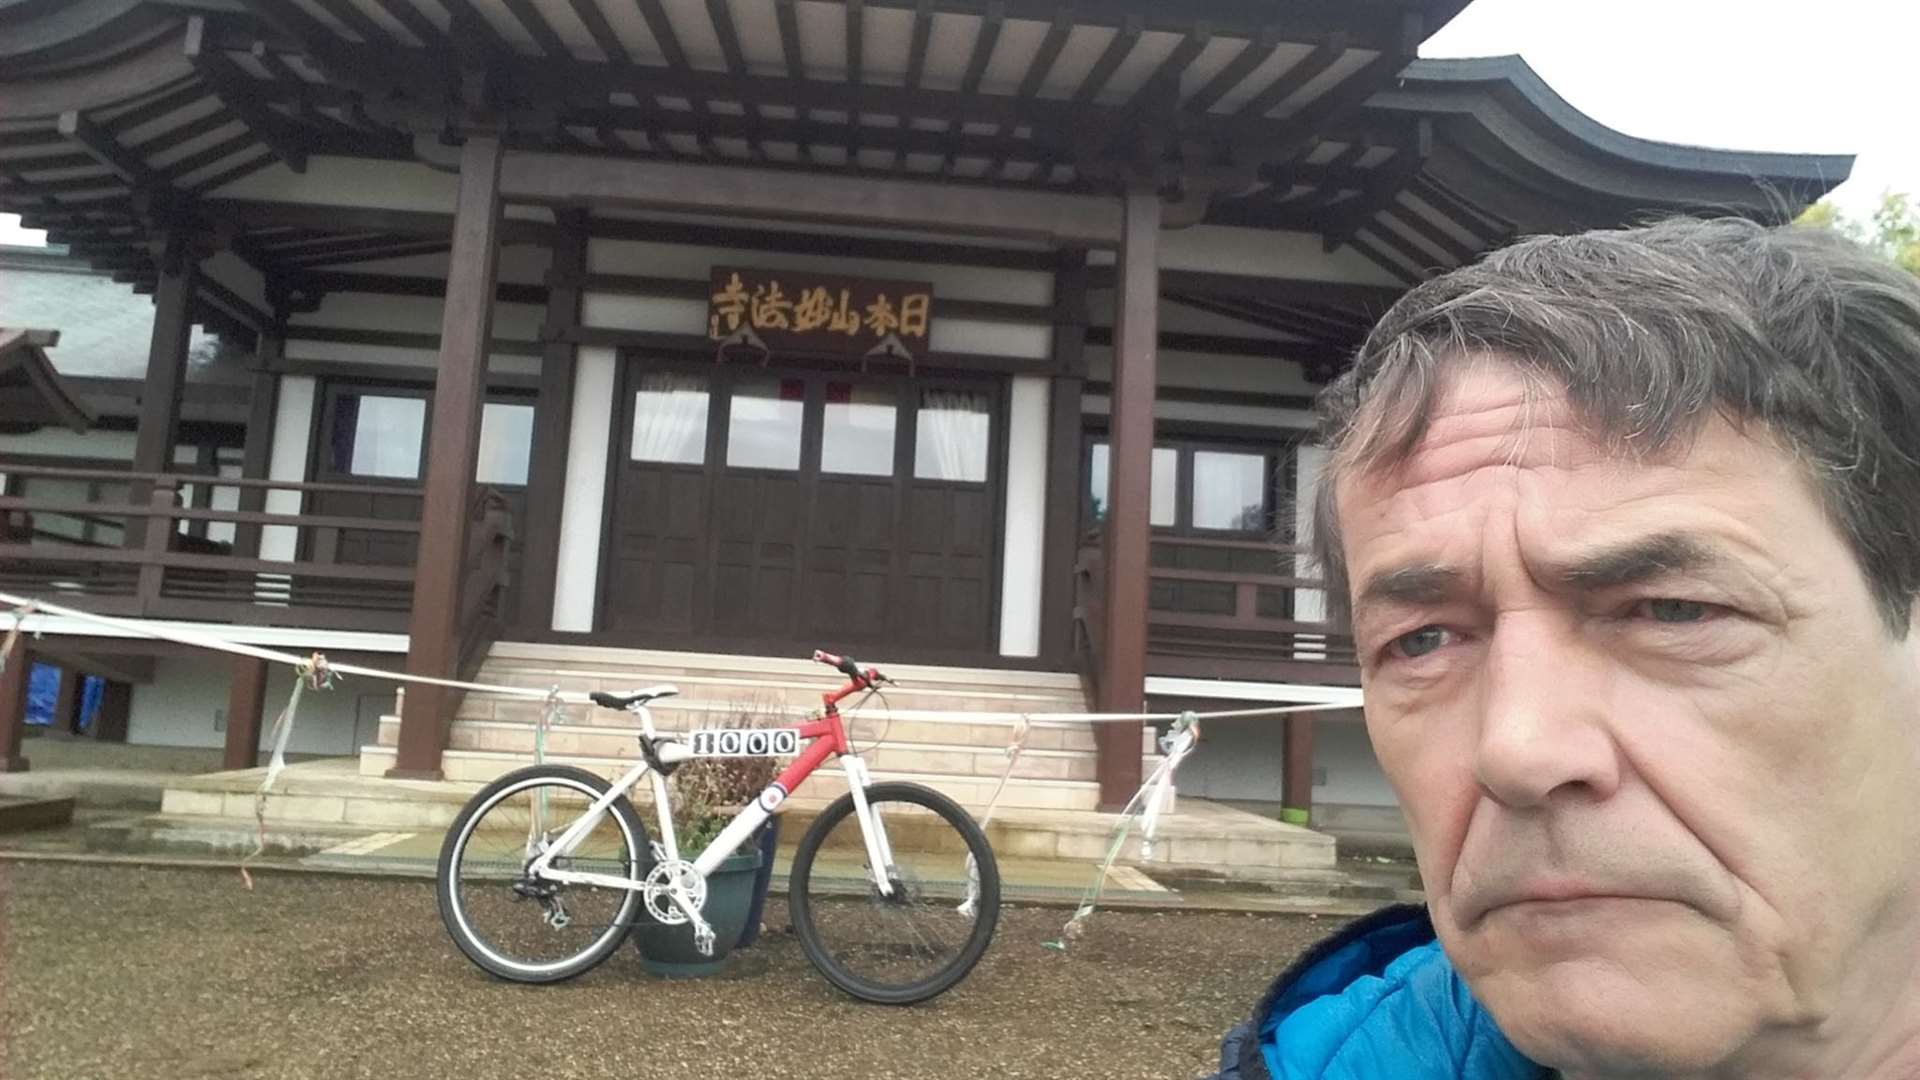 He stopped at a Buddhist temple Milton Keynes with his bike named 'Braders', after Sir Bradley Wiggins